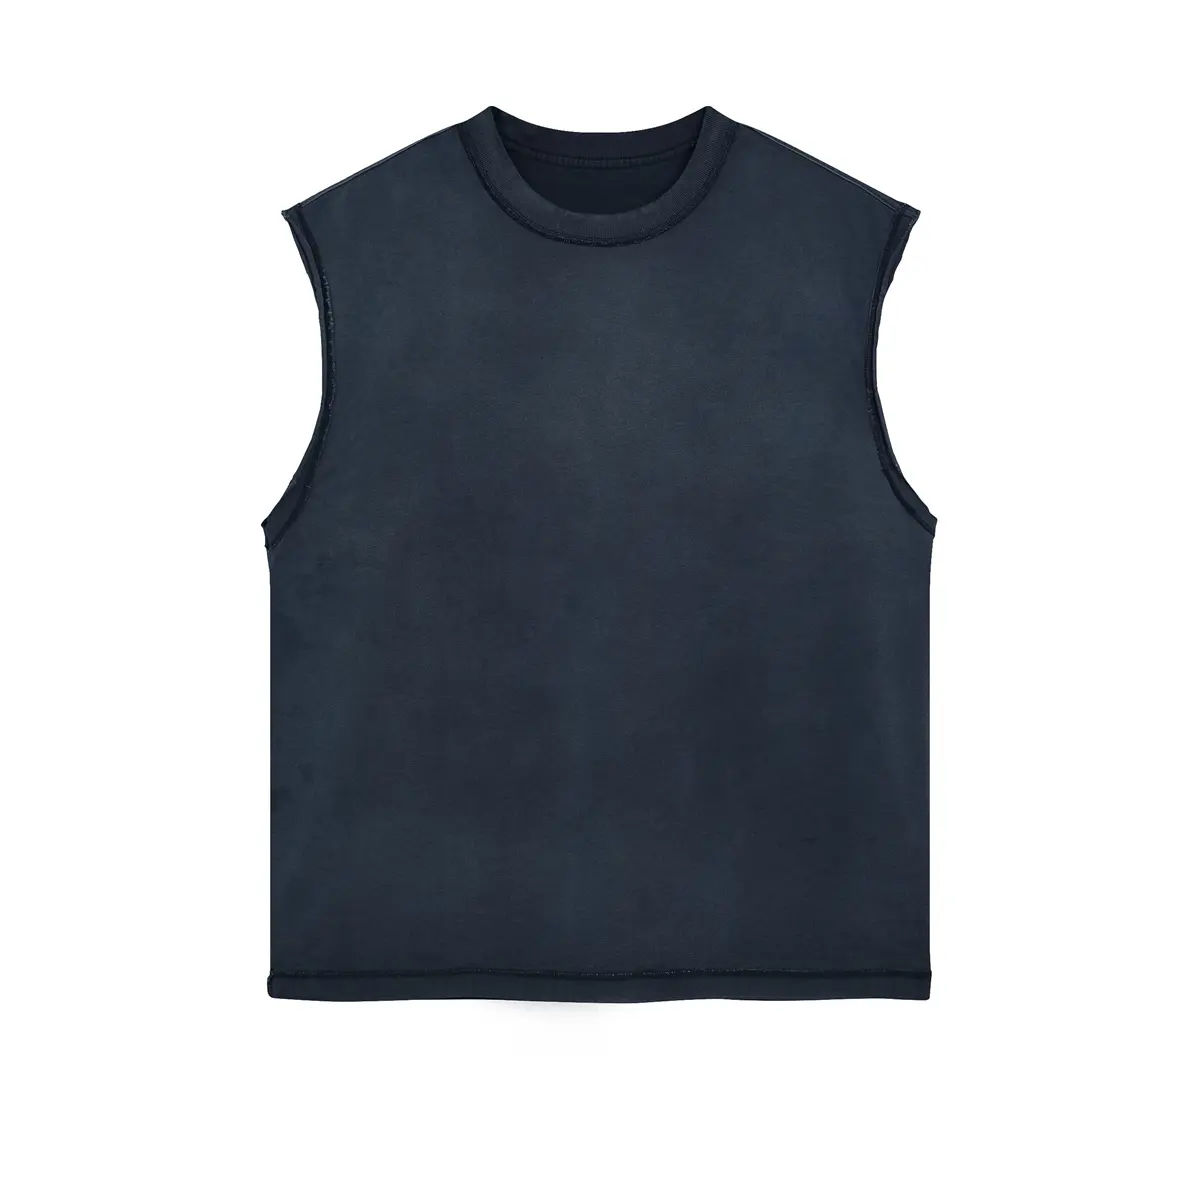 Wholesale Custom logo Cotton Running Singlet Muscle Athletic Shirts Sleeveless Fitness Wear Workout Men Gym Tank Top For Men